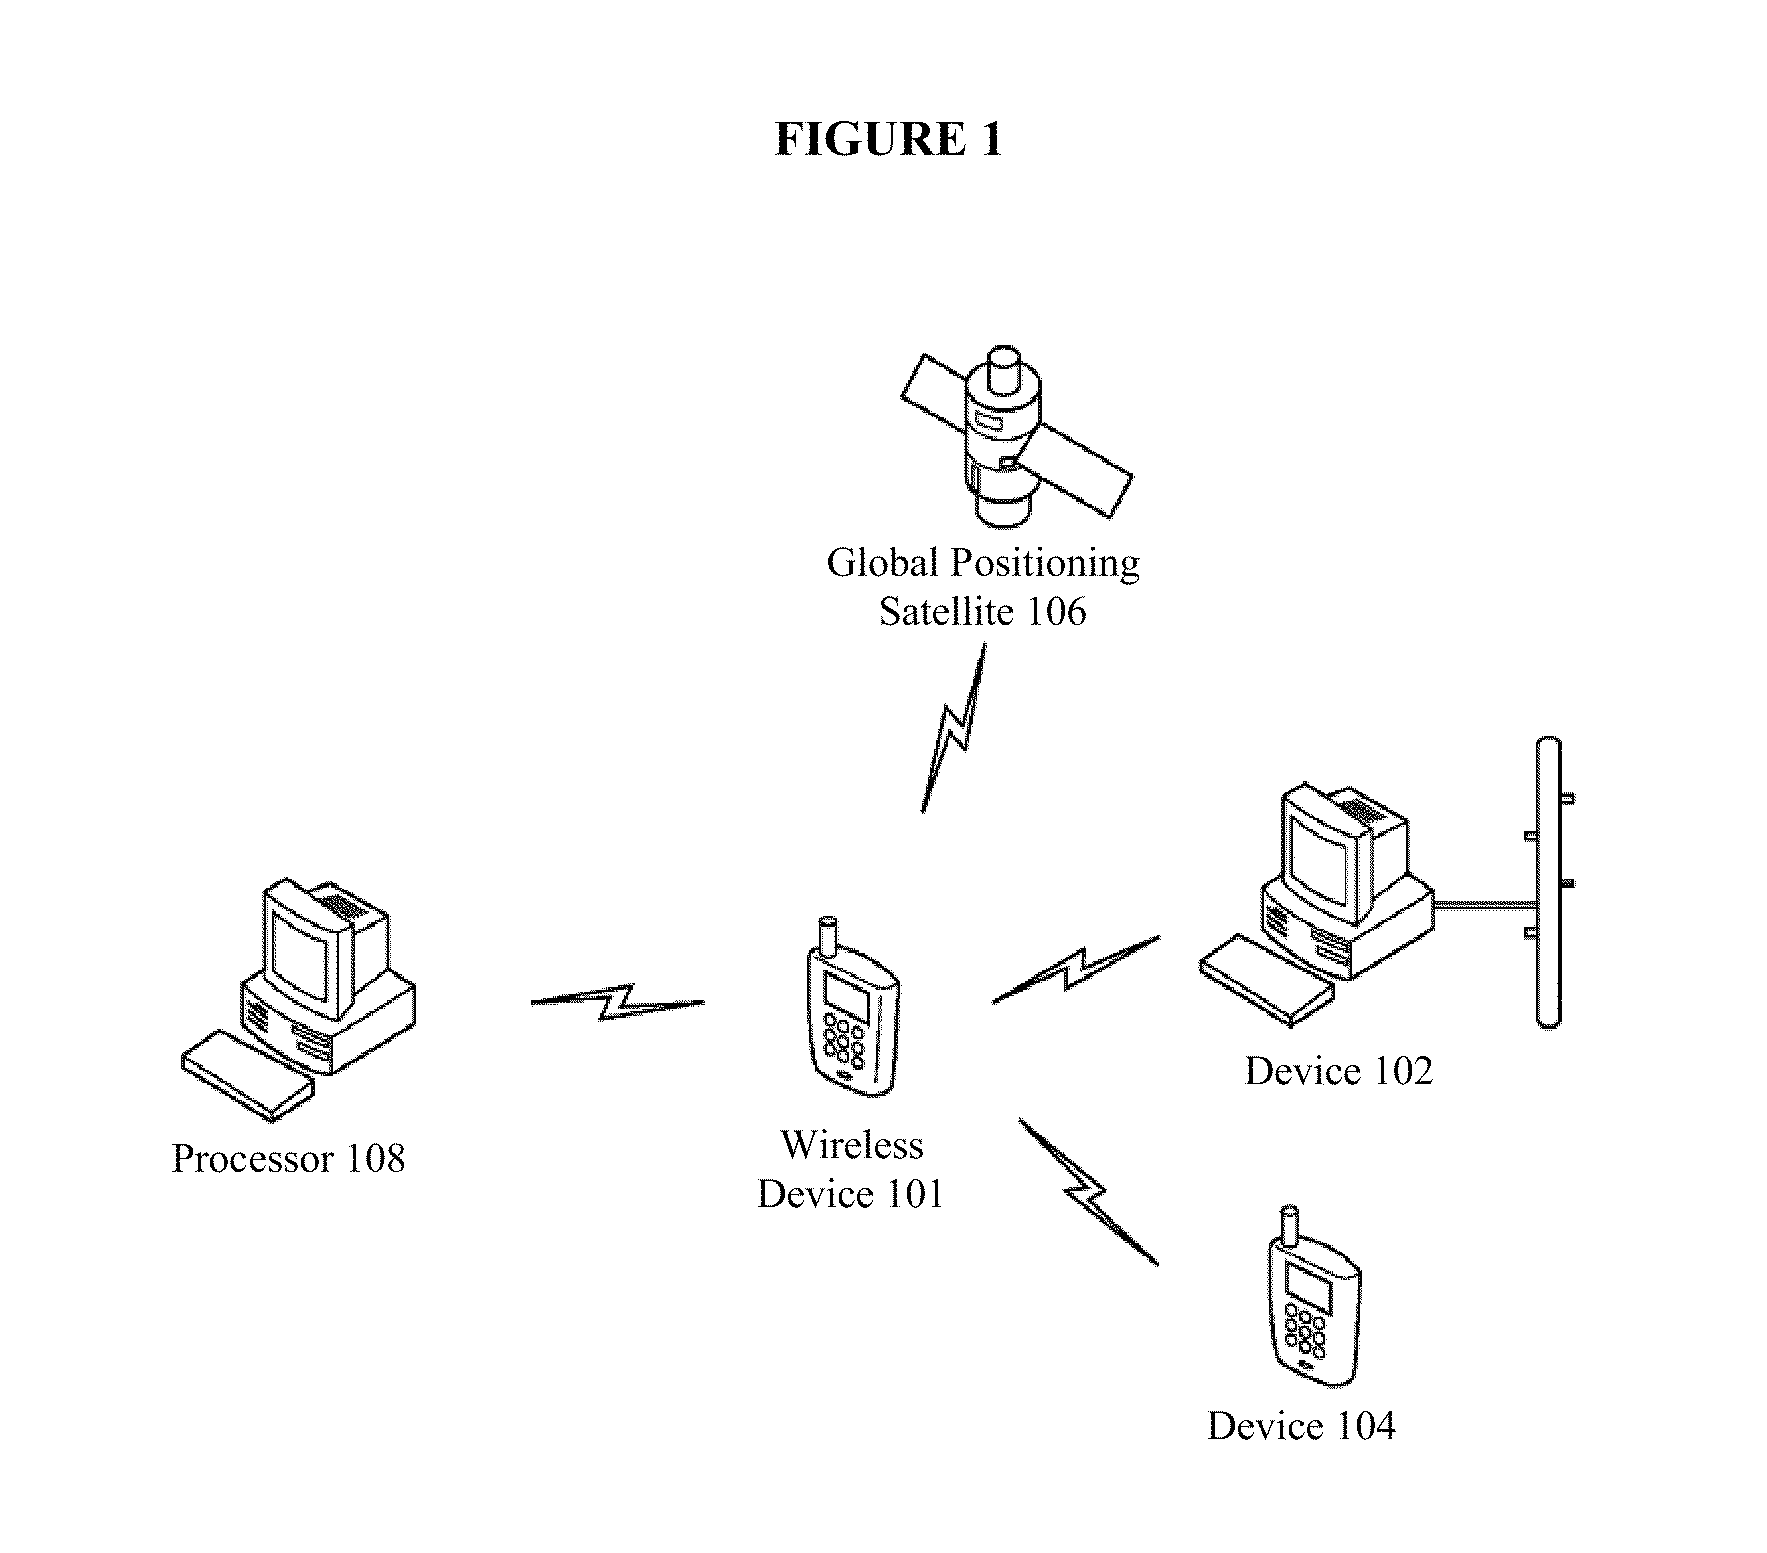 Hybrid wireless area network (WAN) and global positioning system (GPS) circuit board and method for seamless indoor and outdoor tracking